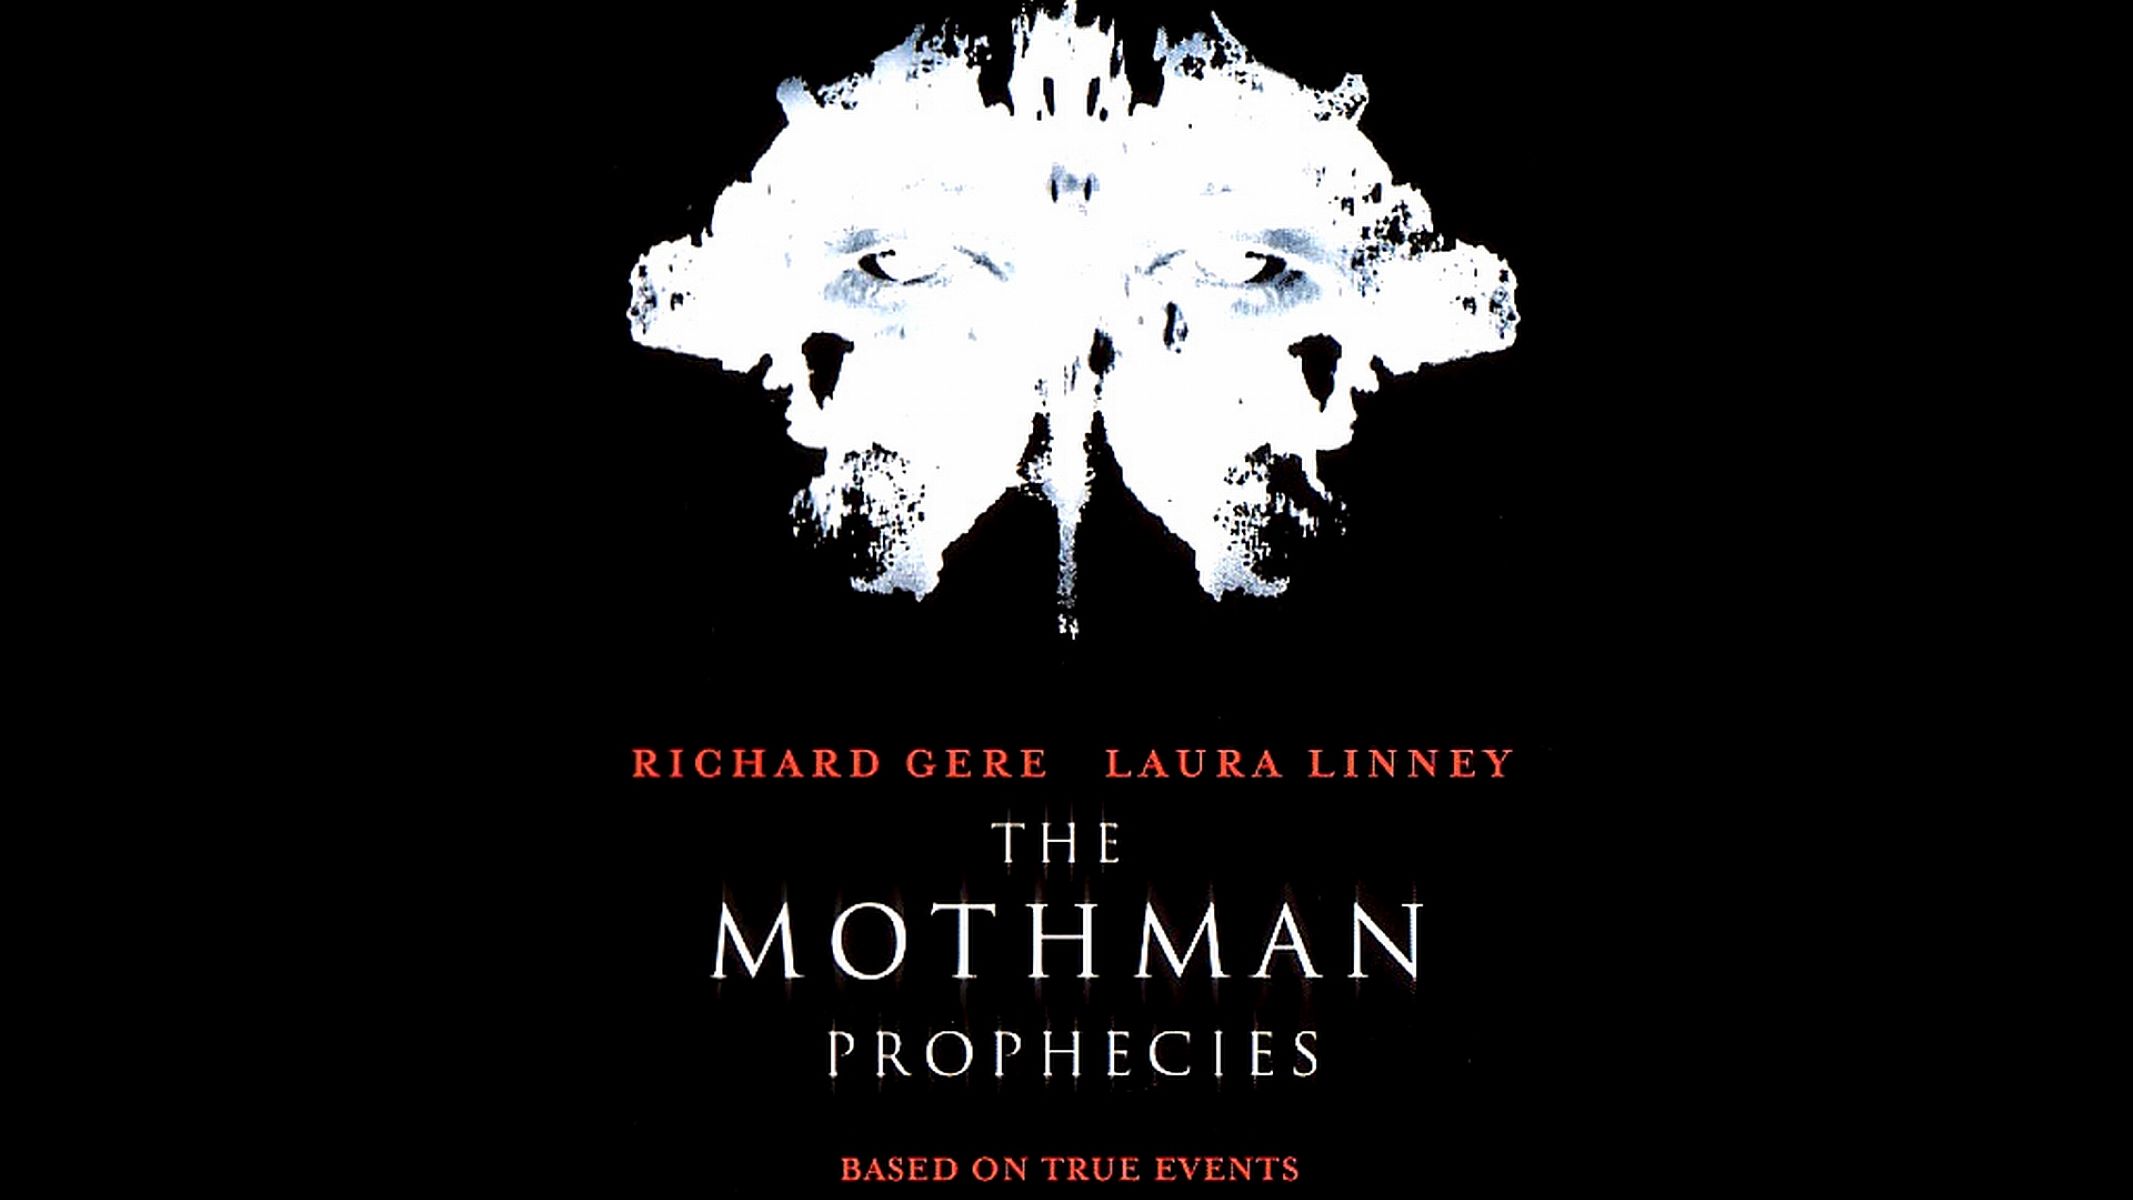 44-facts-about-the-movie-the-mothman-prophecies